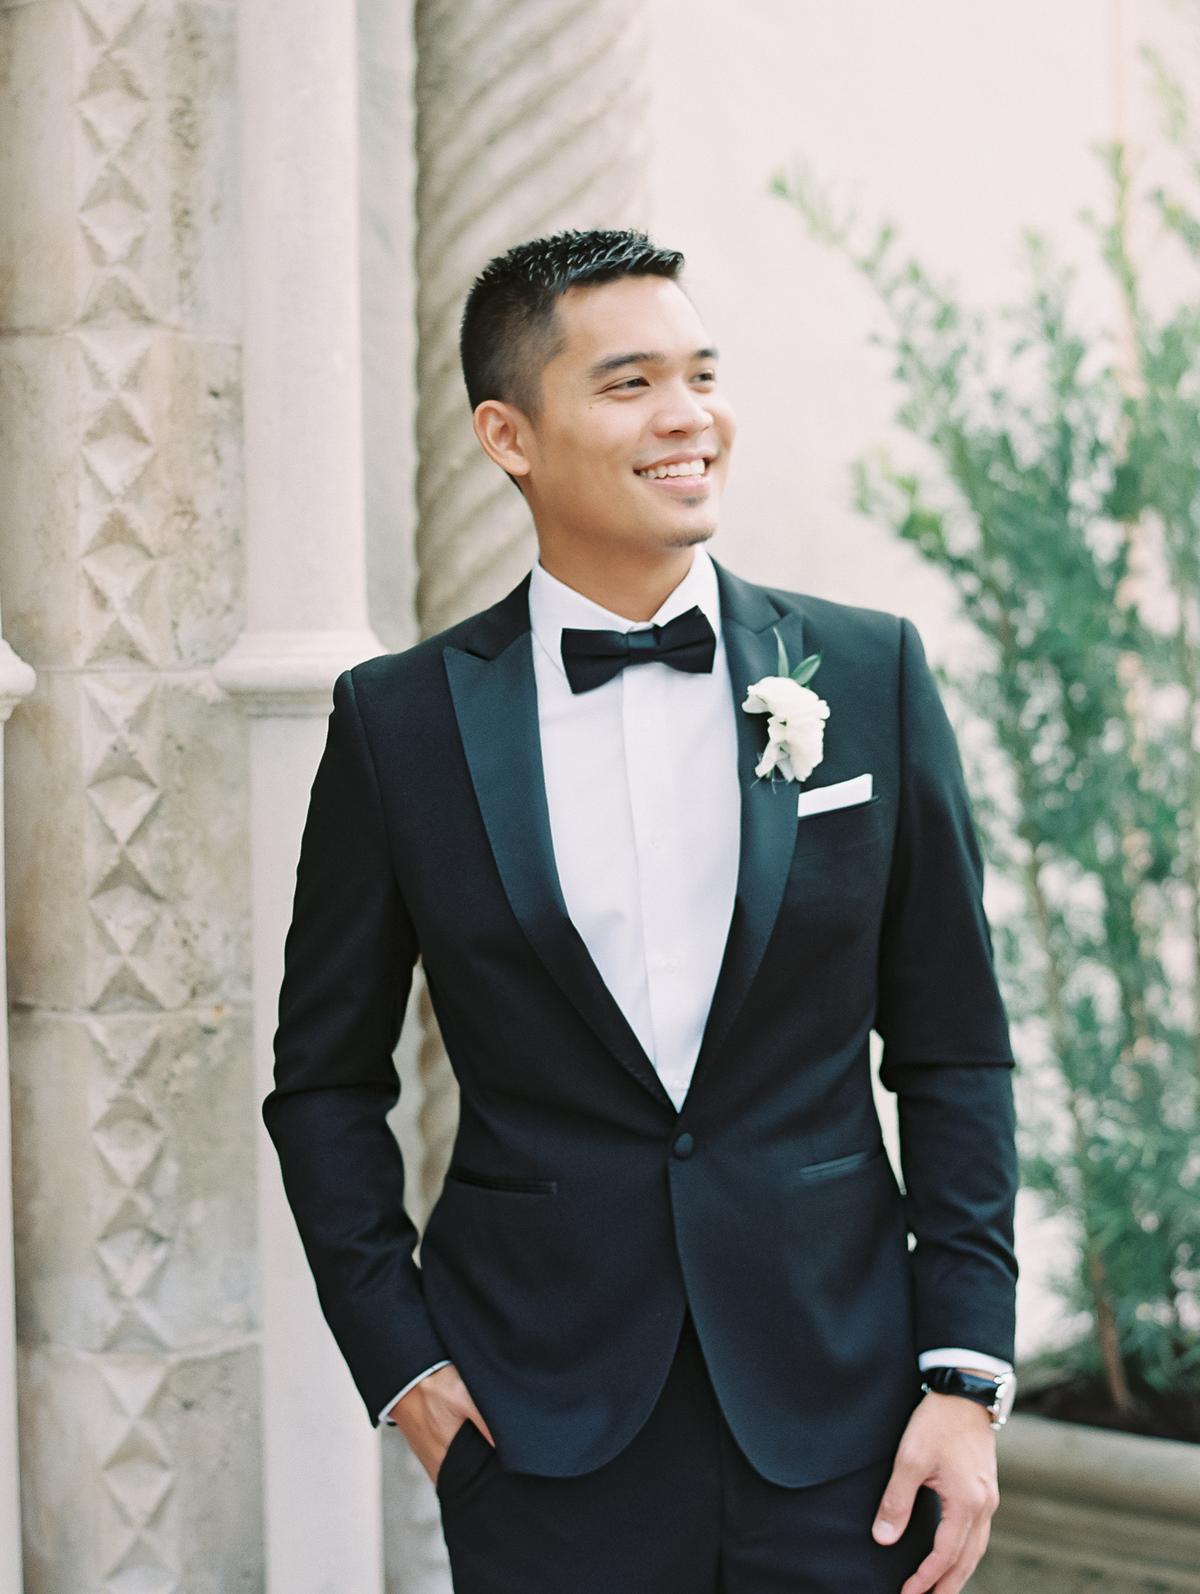 A Downtown Miami Wedding Filled With Personal Touches, Sentimental ...